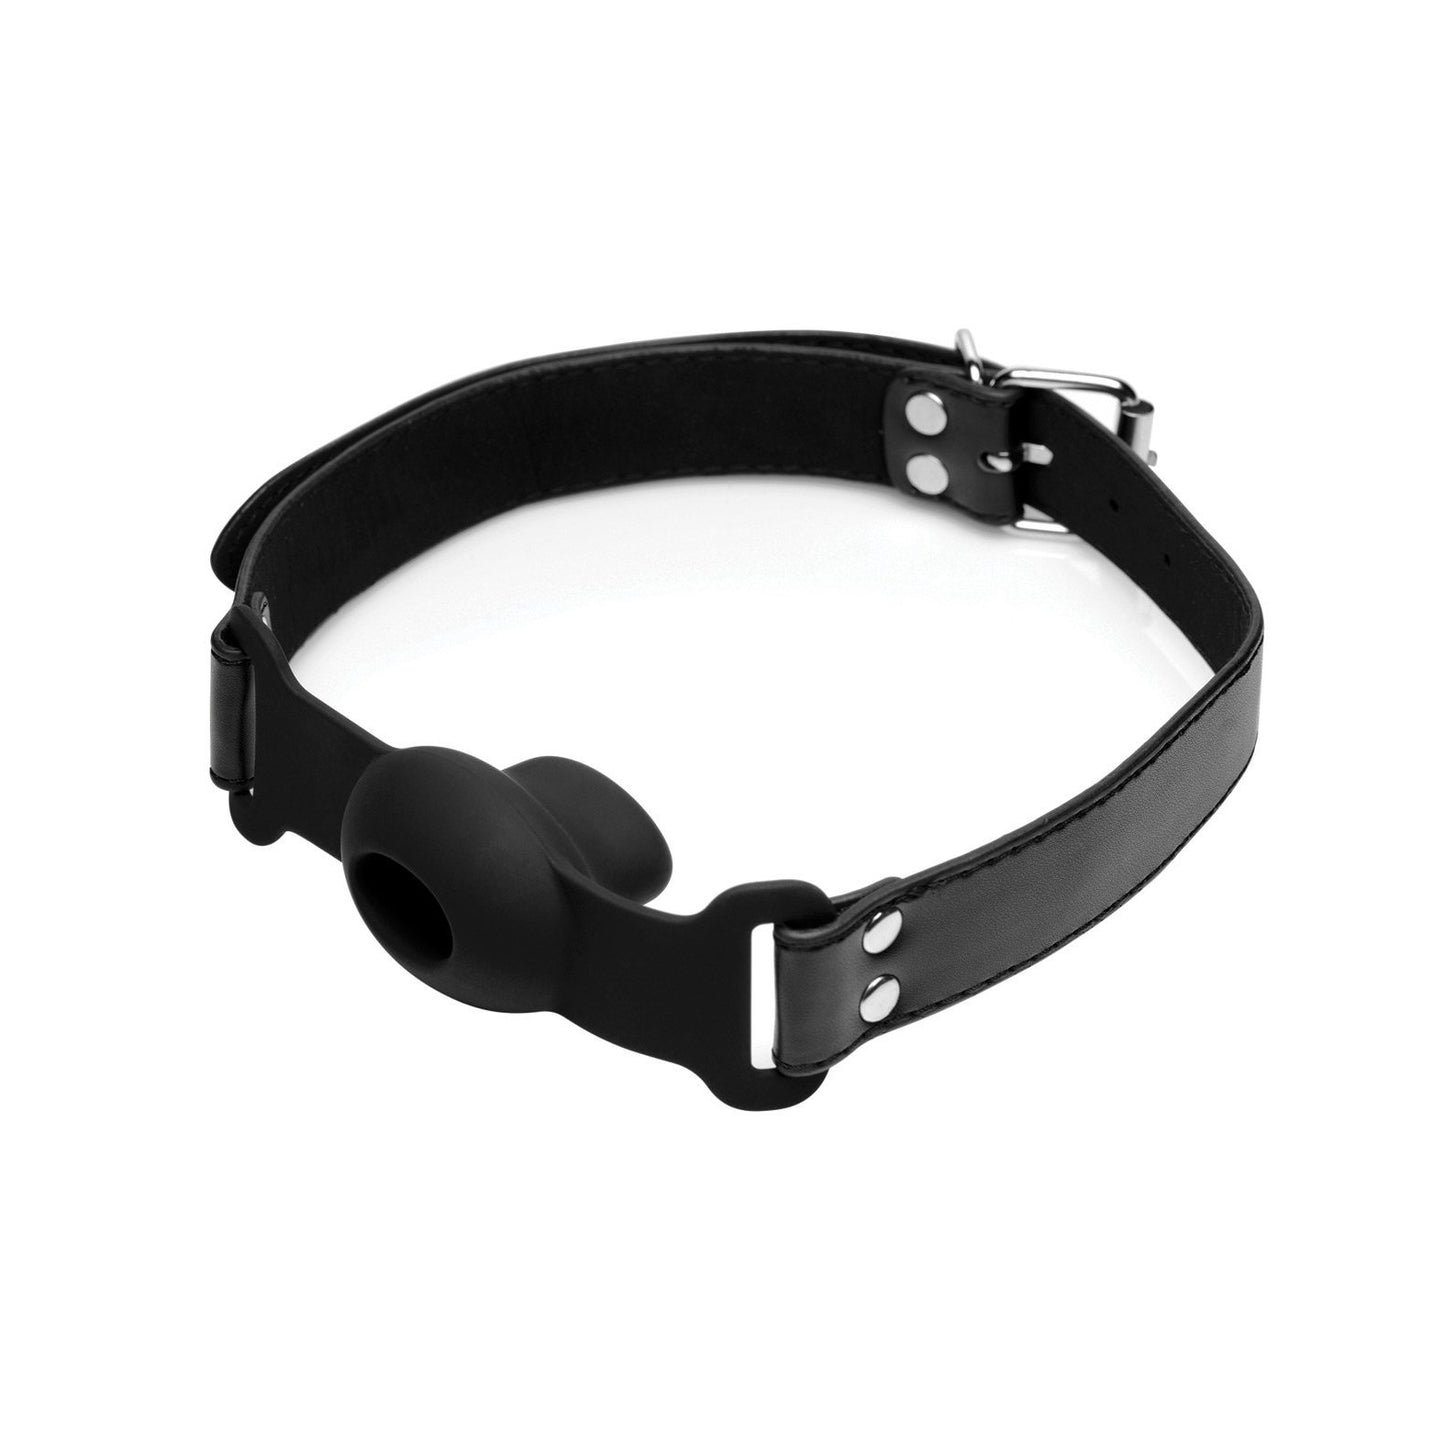 Strict Hollow Silicone Ball Gag